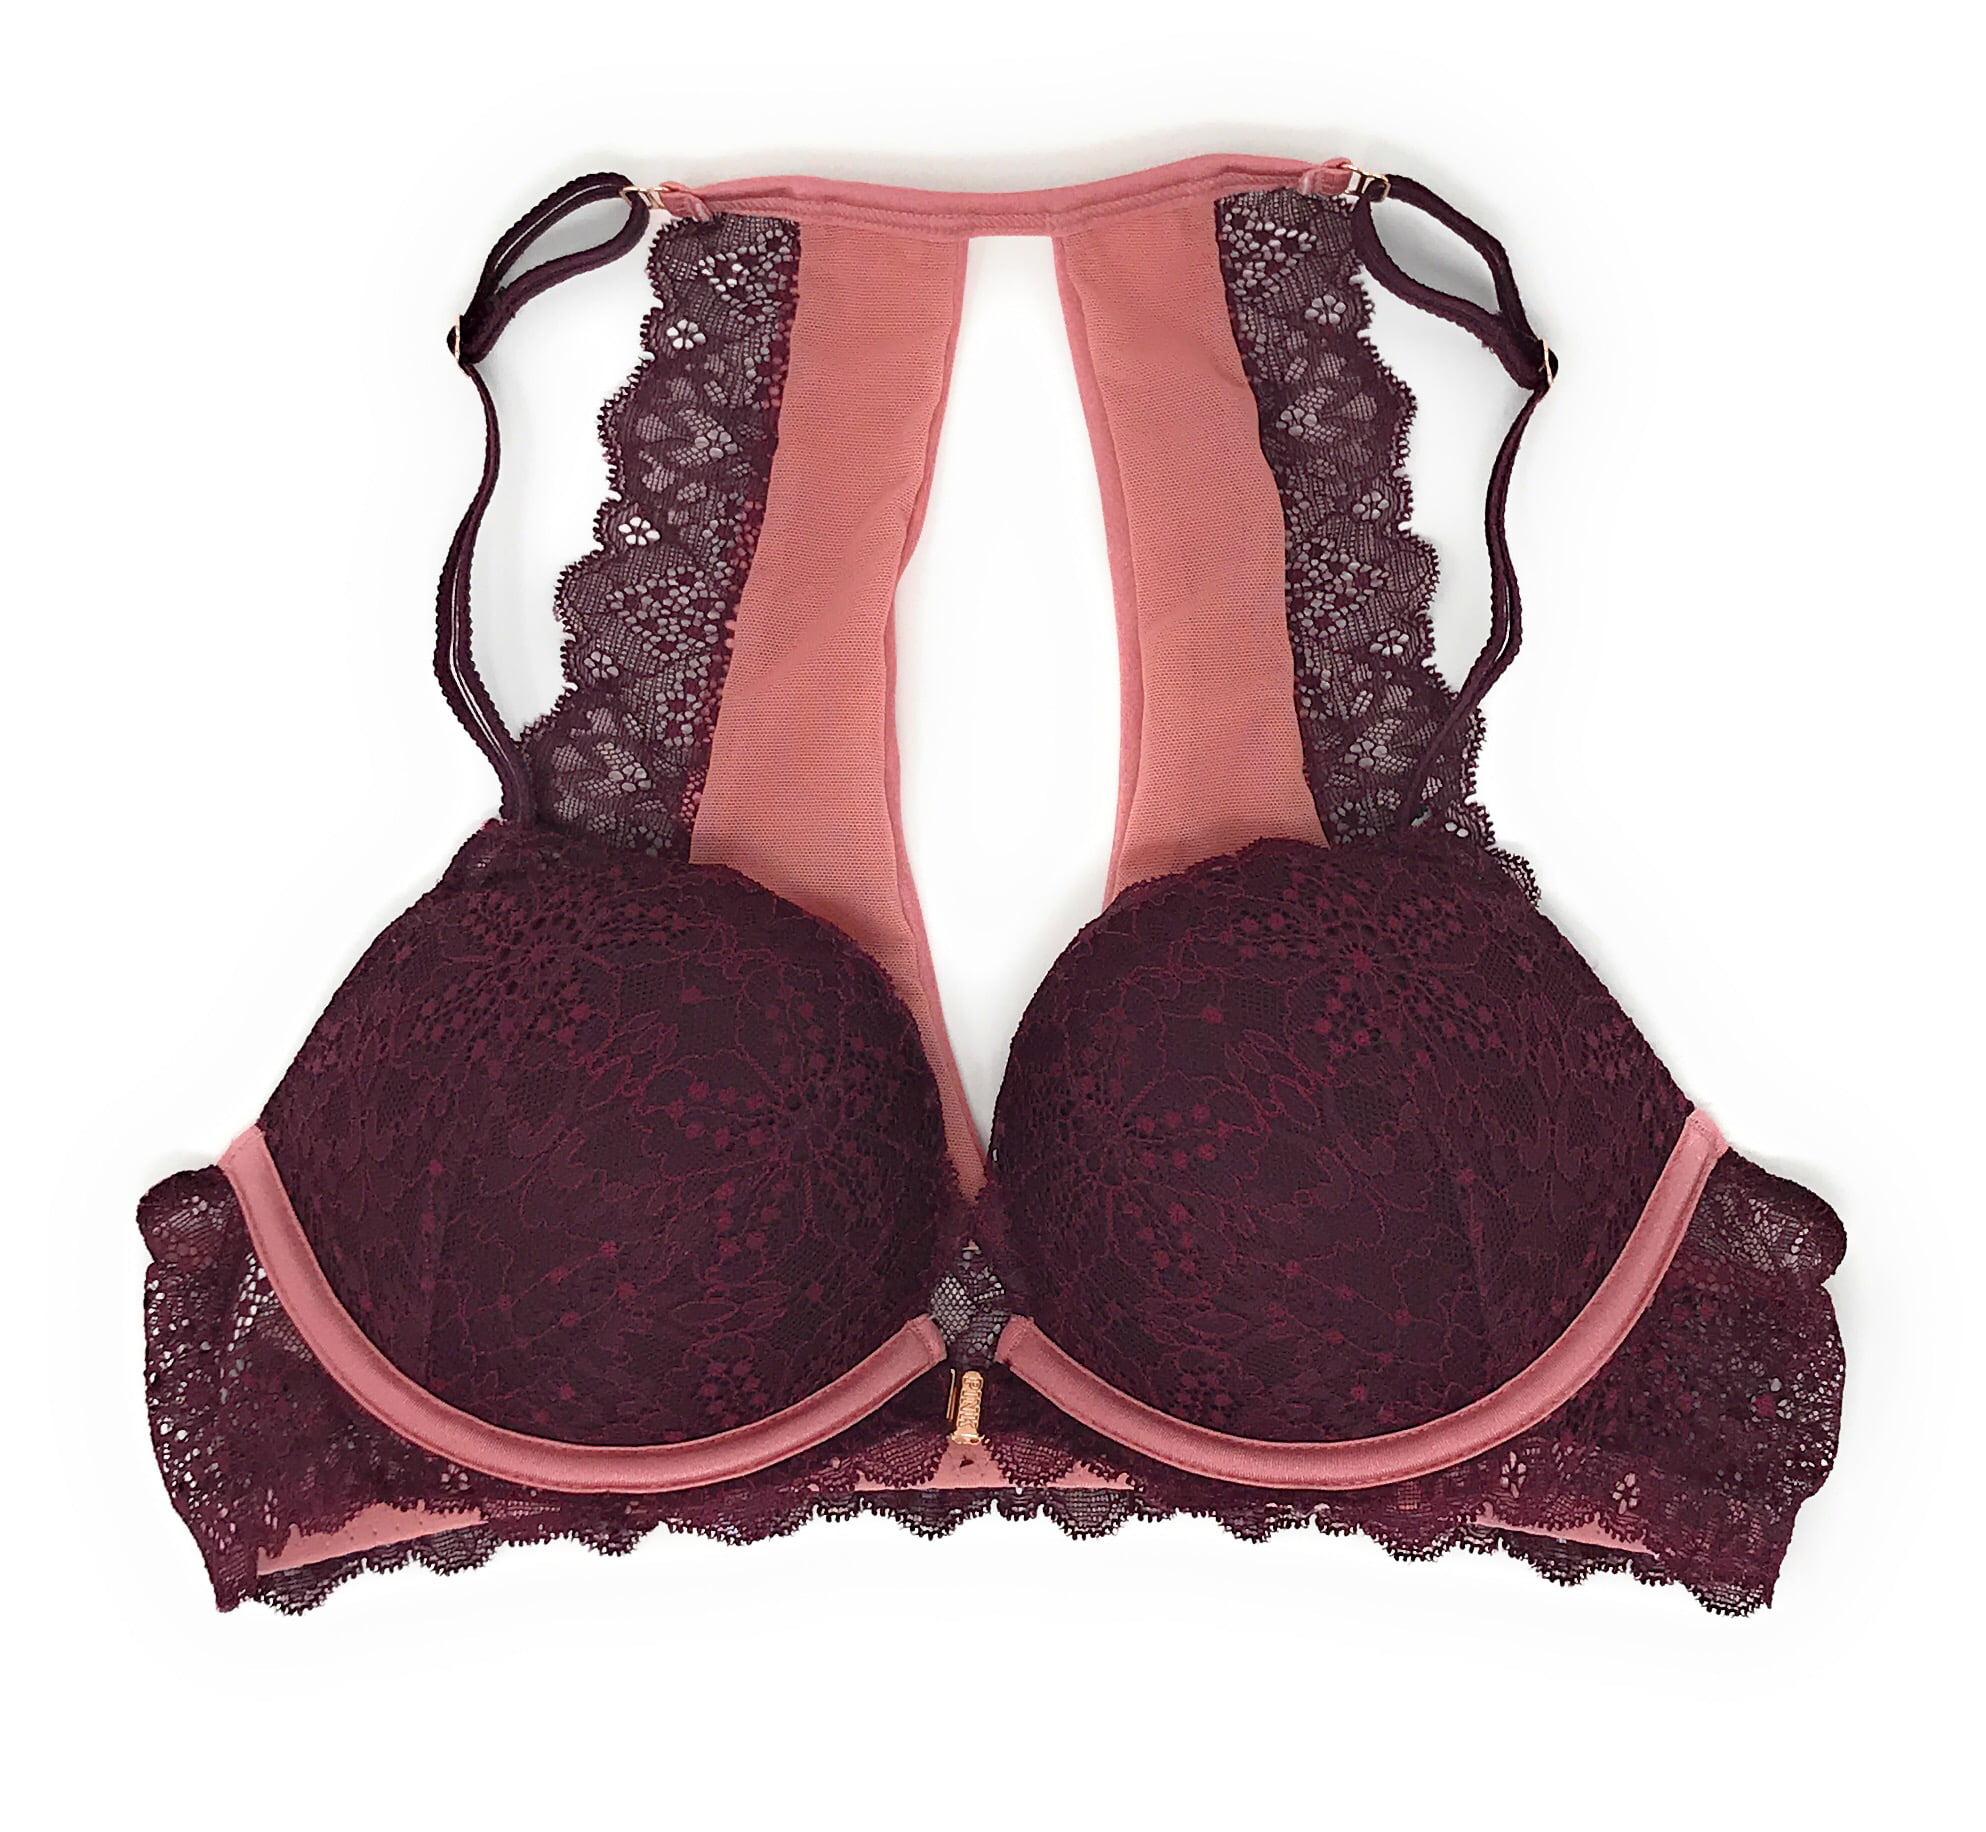 PINK Victoria's Secret, Intimates & Sleepwear, Victorias Secret 32c Cup  Bra With Adjustable Closure And Lace Overlayscalloped